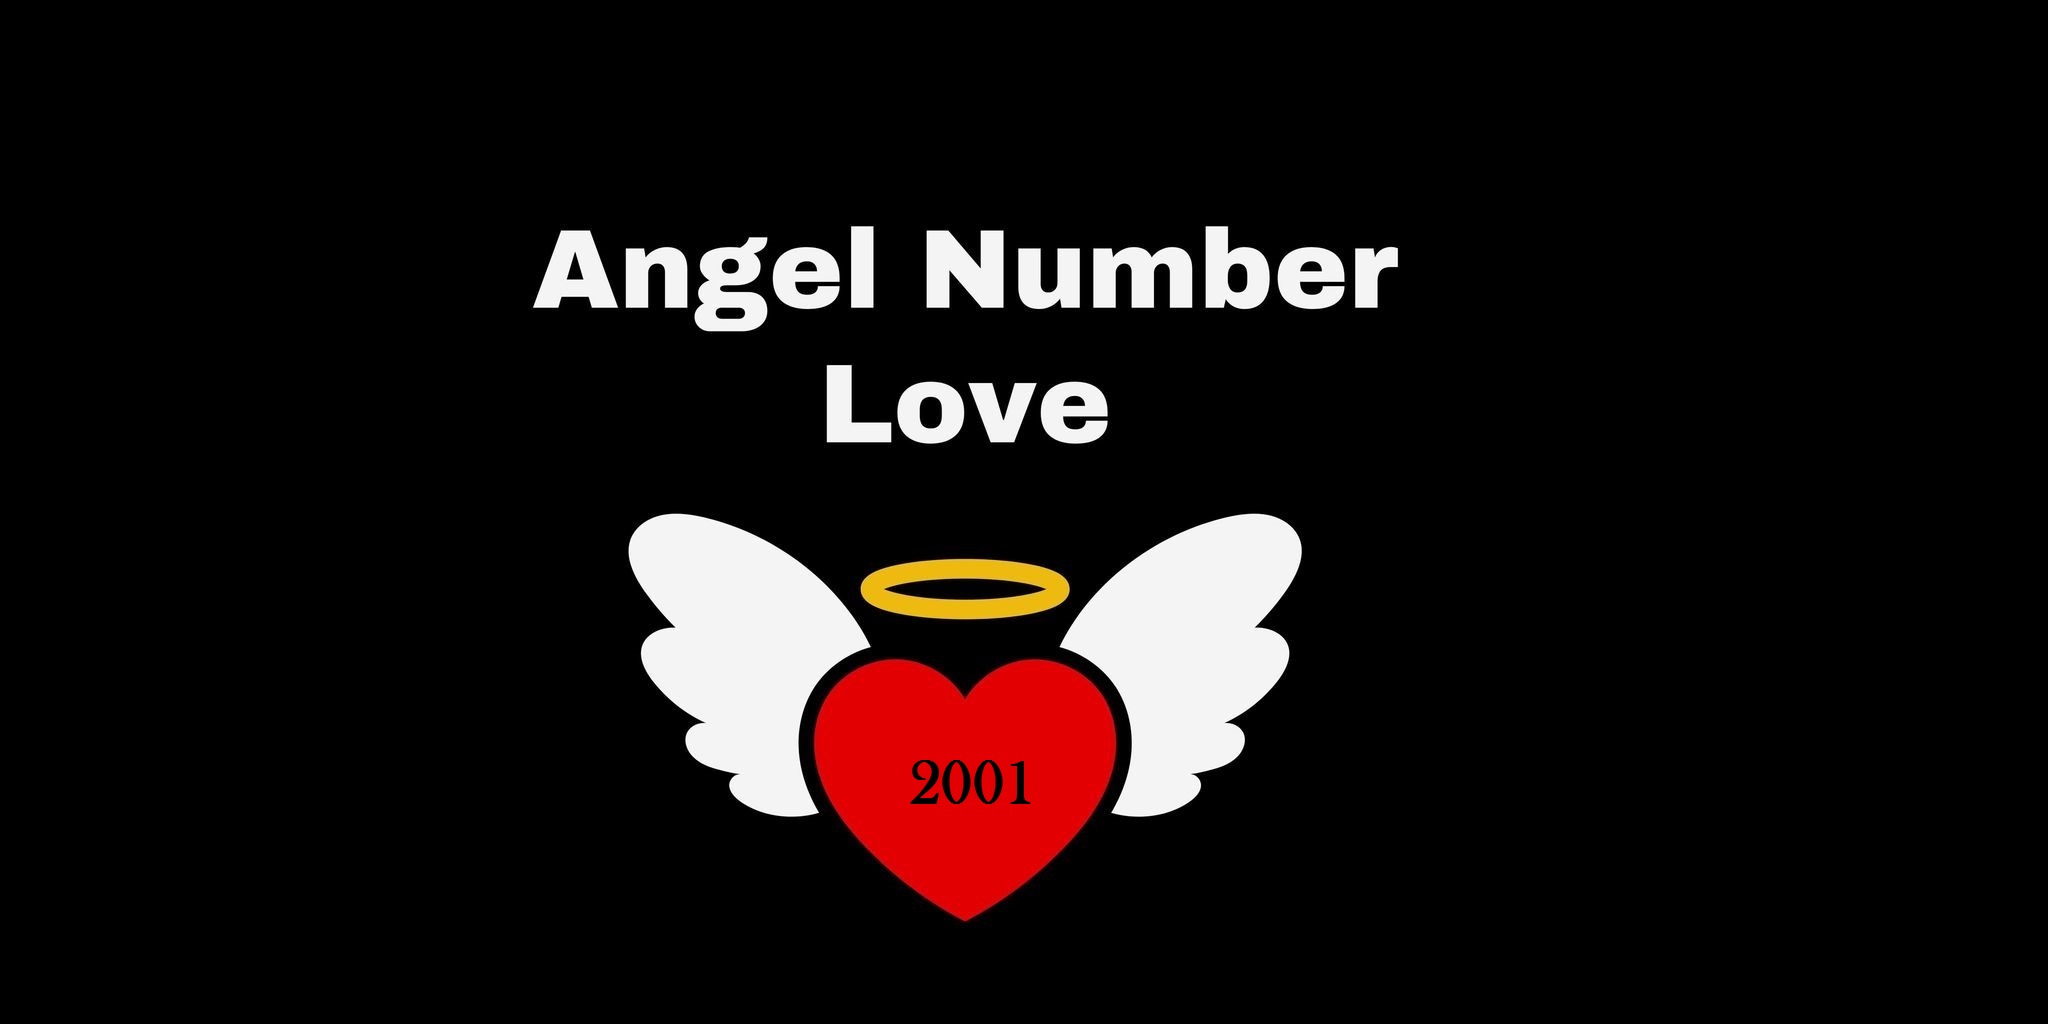 2001 Angel Number Meaning In Love